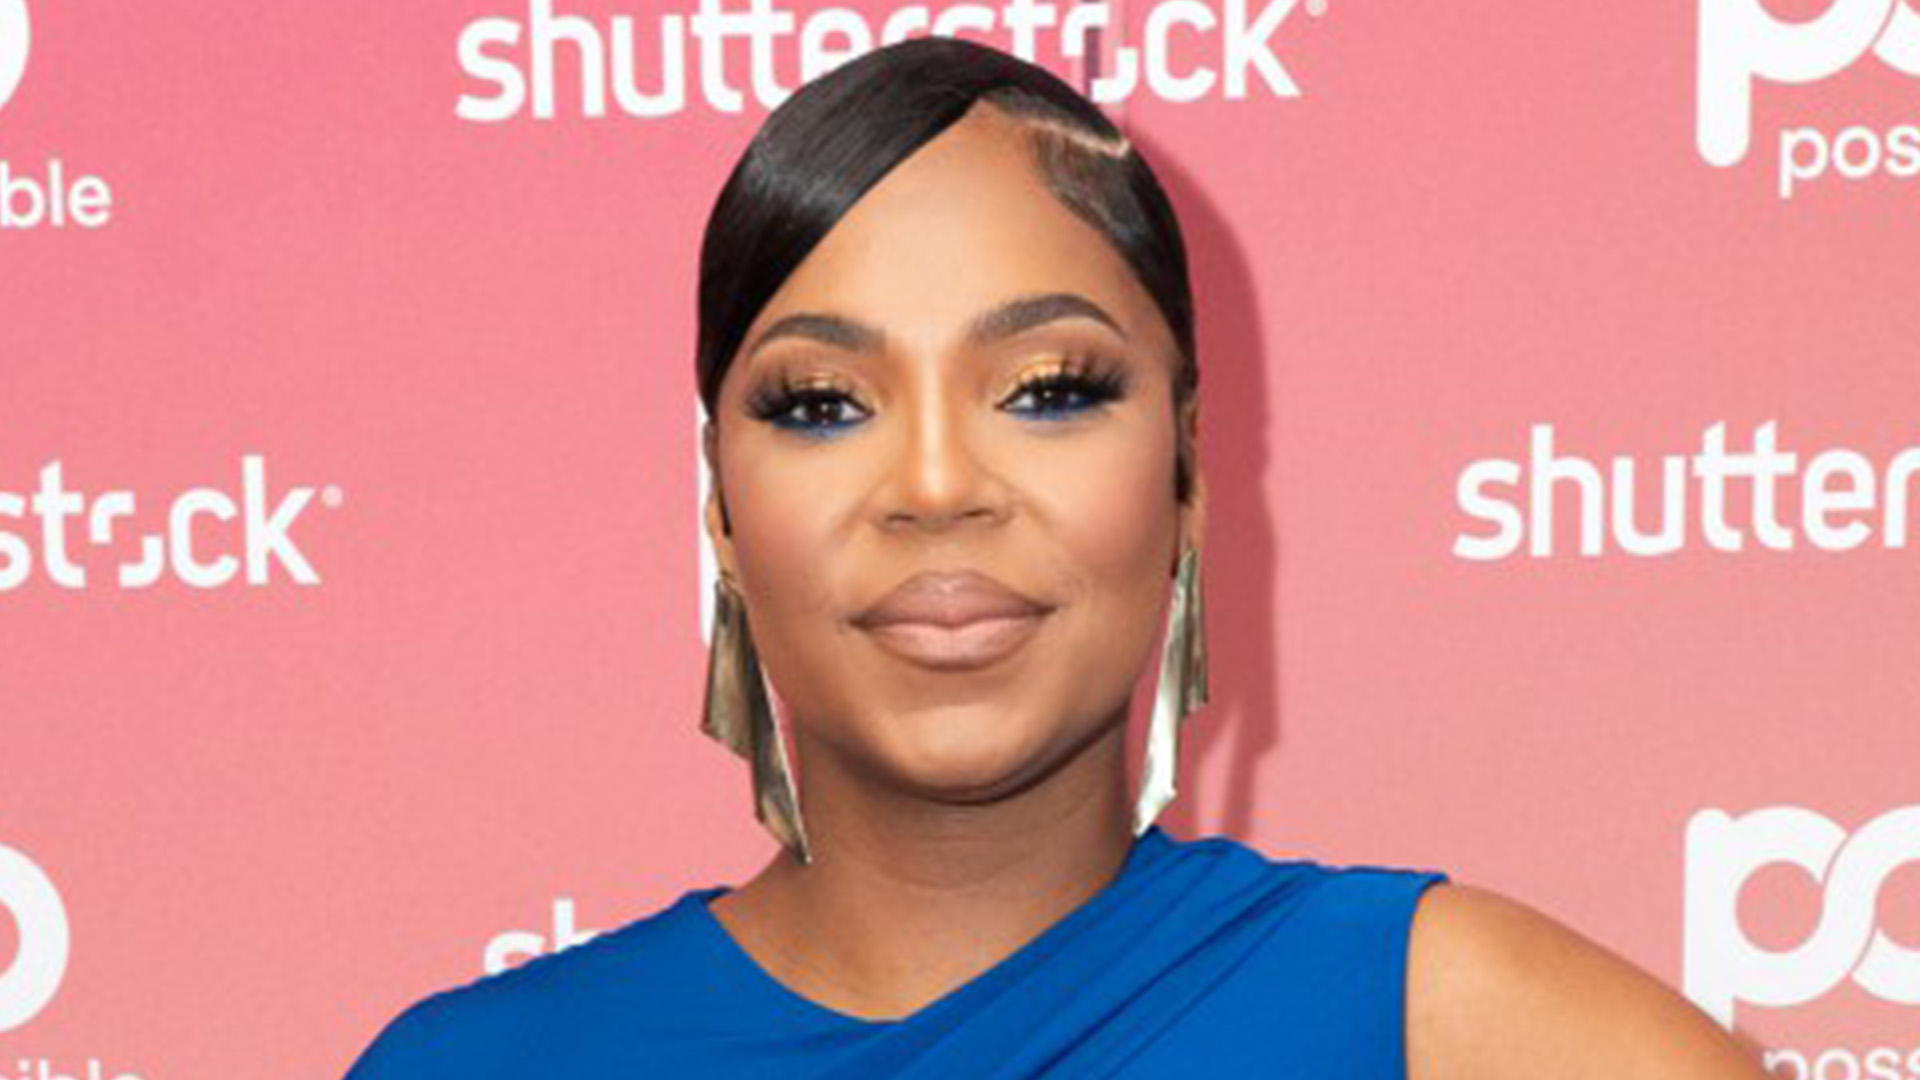 Pregnant Ashanti, 43, debuts baby bump in skintight blue dress at Miami conference after announcing engagement to Nelly [Video]